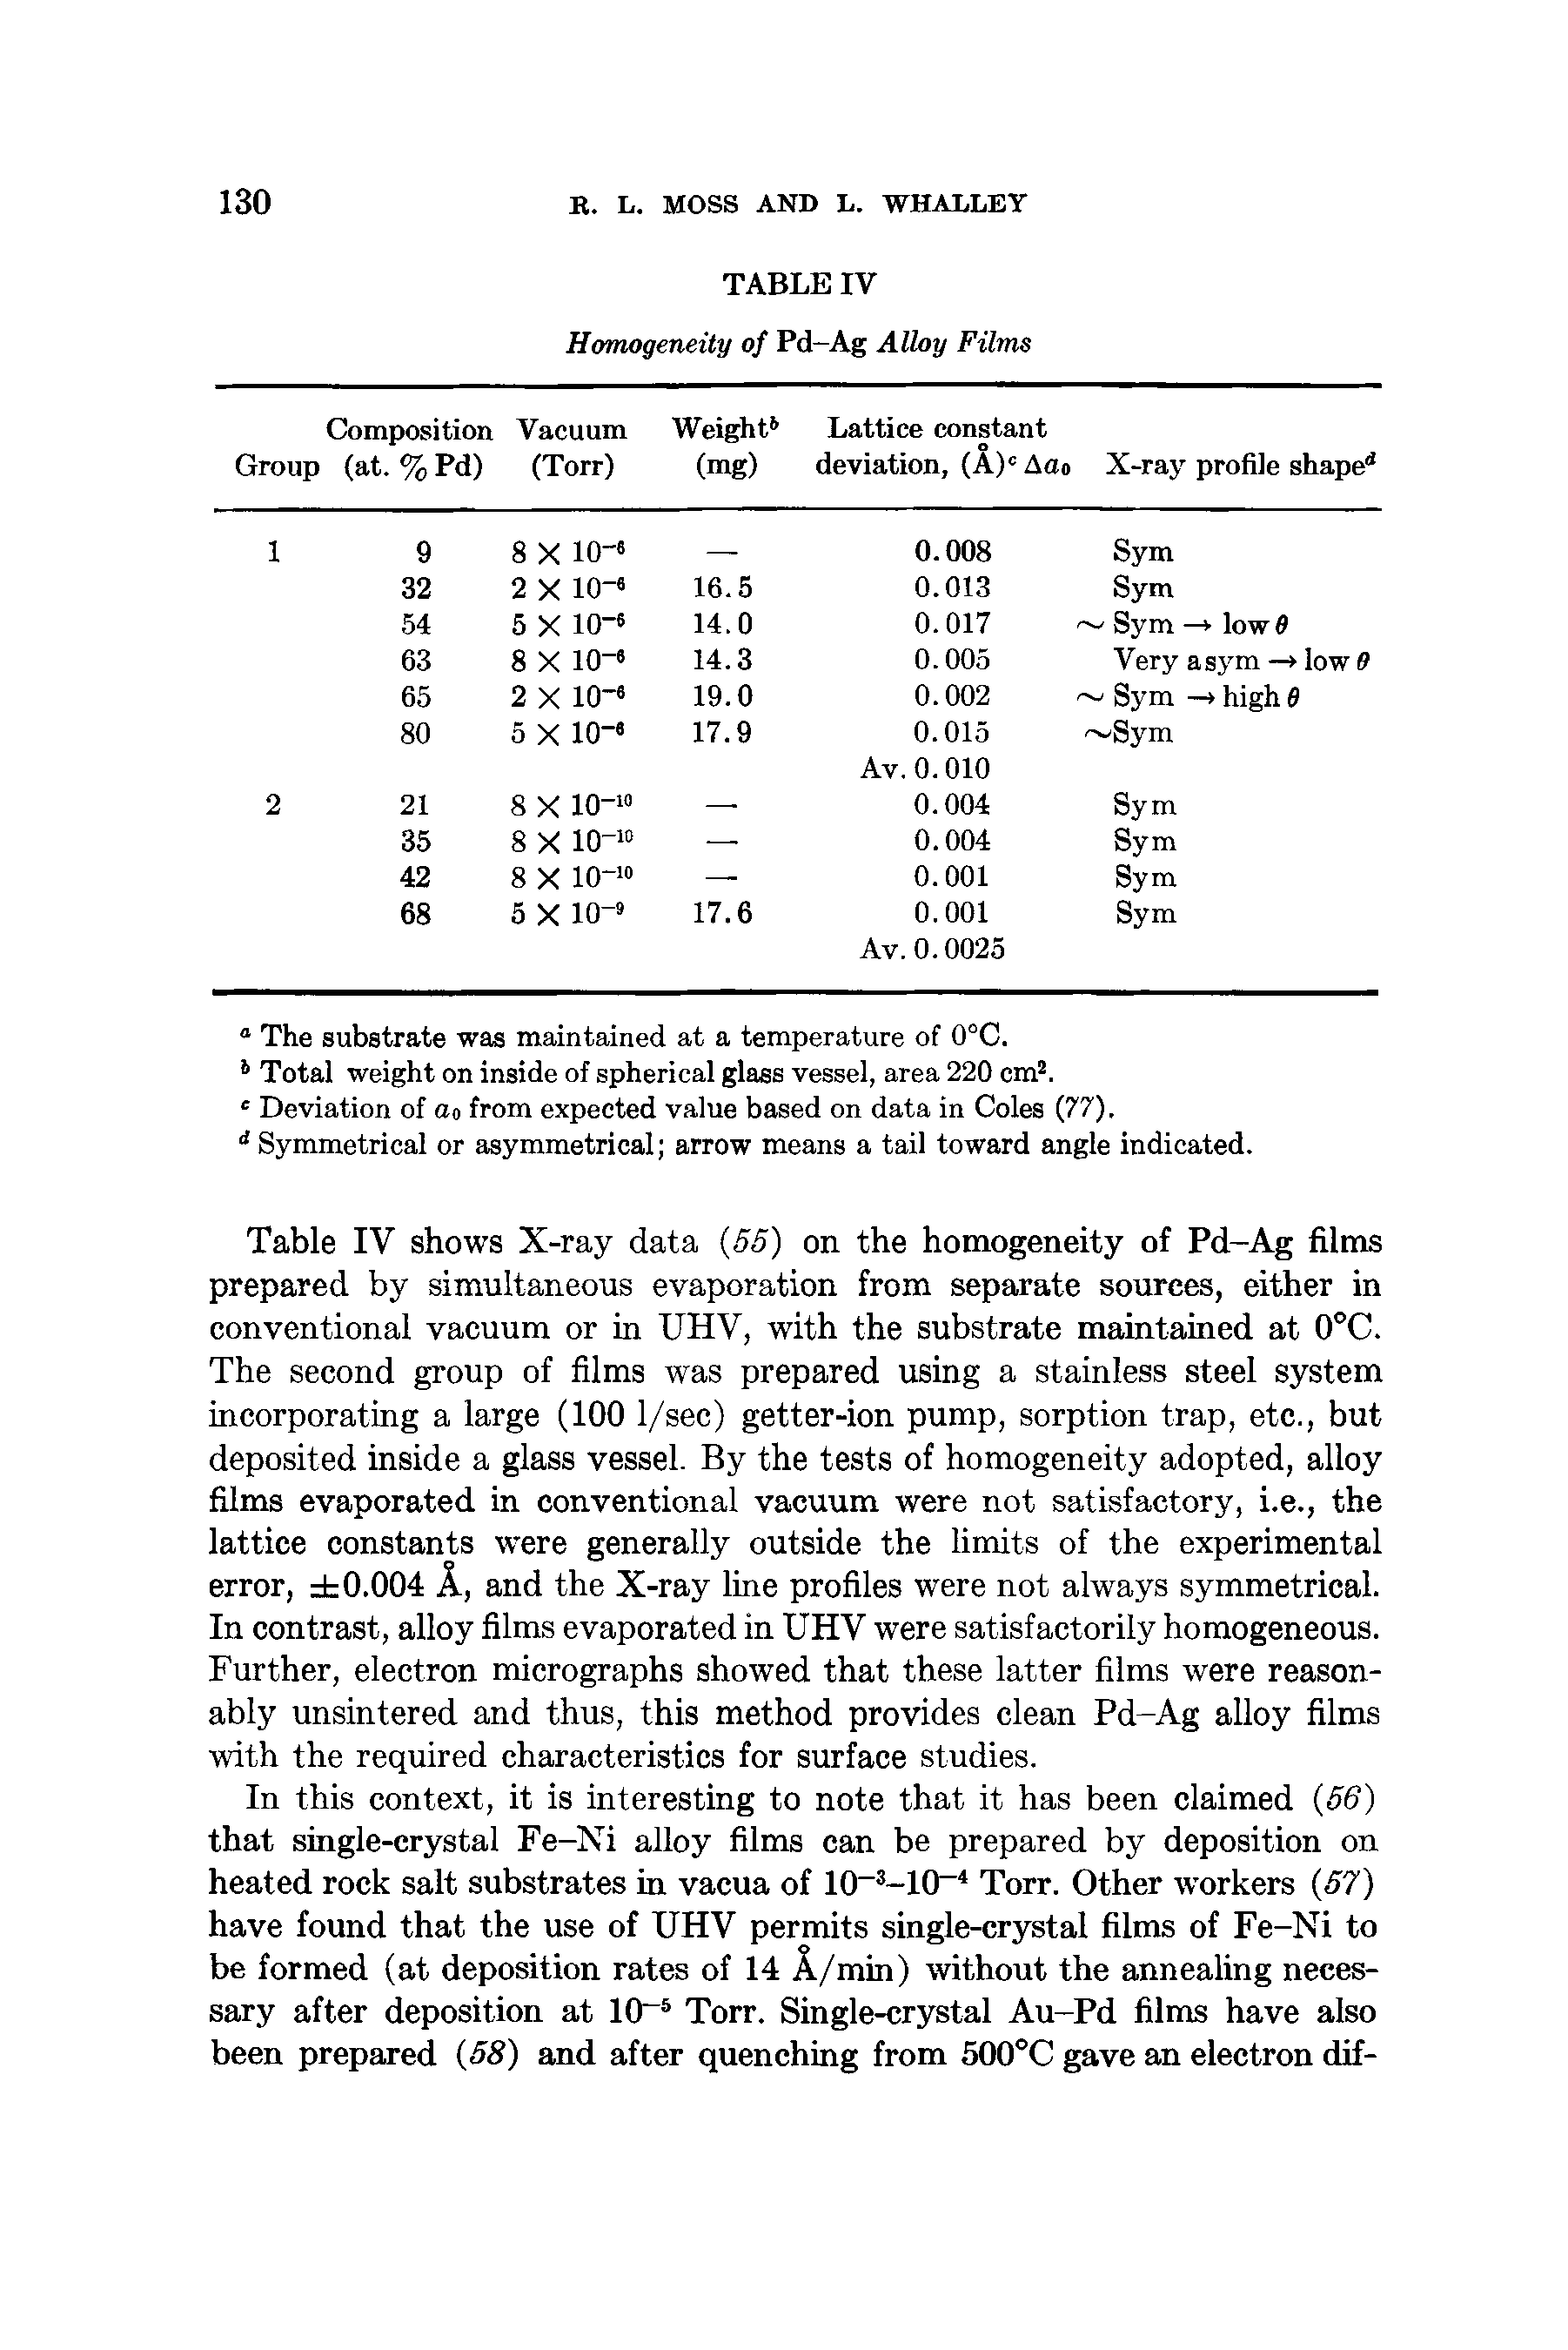 Table IV shows X-ray data (55) on the homogeneity of Pd-Ag films prepared by simultaneous evaporation from separate sources, either in conventional vacuum or in UHV, with the substrate maintained at 0°C. The second group of films was prepared using a stainless steel system incorporating a large (100 1/sec) getter-ion pump, sorption trap, etc., but deposited inside a glass vessel. By the tests of homogeneity adopted, alloy films evaporated in conventional vacuum were not satisfactory, i.e., the lattice constants were generally outside the limits of the experimental error, 0.004 A, and the X-ray line profiles were not always symmetrical. In contrast, alloy films evaporated in UHV were satisfactorily homogeneous. Further, electron micrographs showed that these latter films were reasonably unsintered and thus, this method provides clean Pd-Ag alloy films with the required characteristics for surface studies.